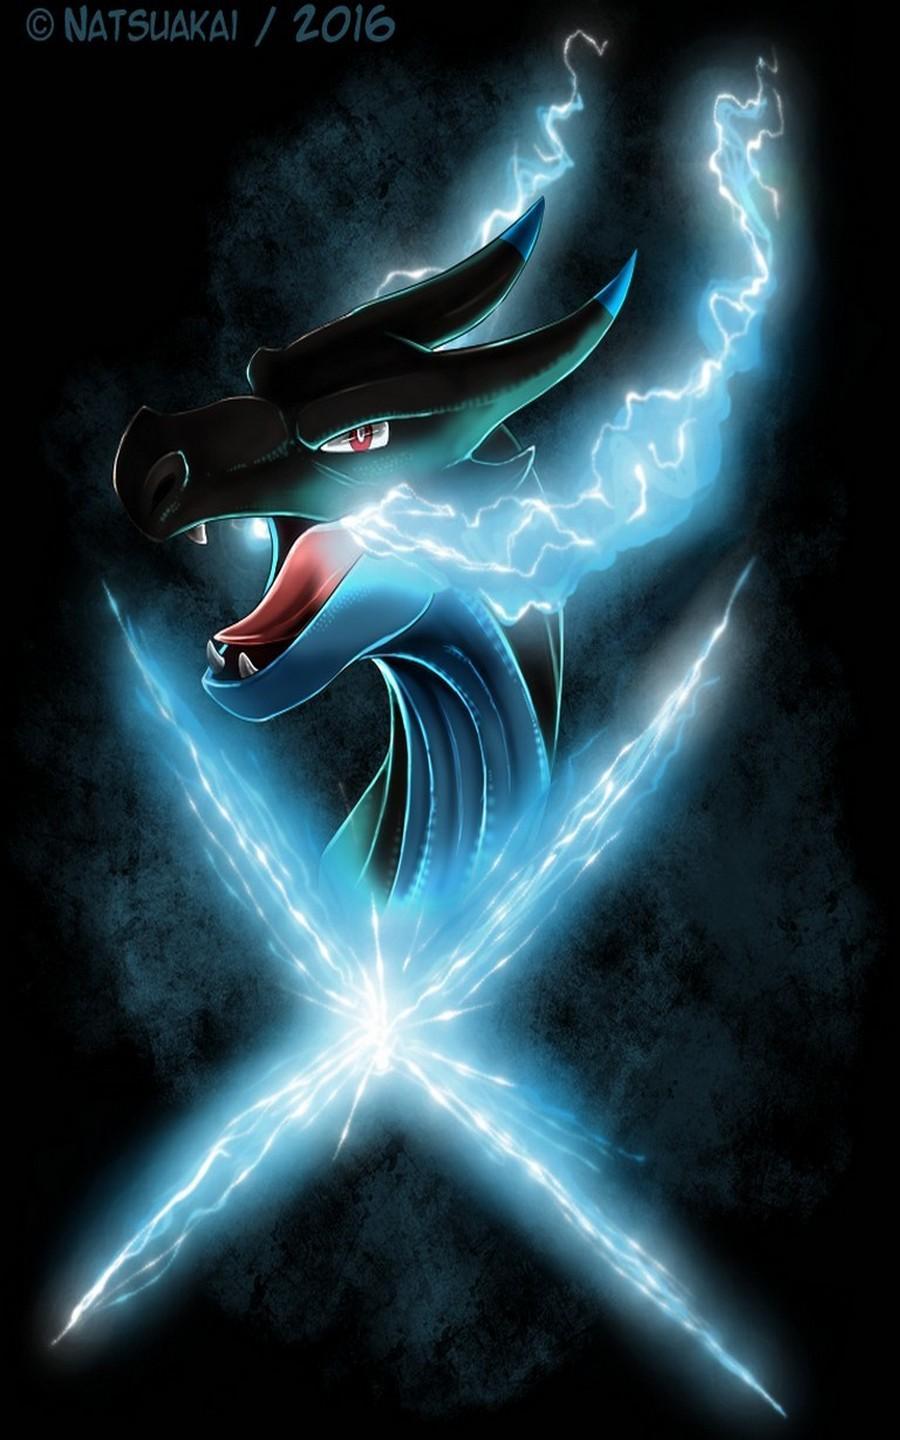 Mega Charizard X Wallpaper for Android   APK Download